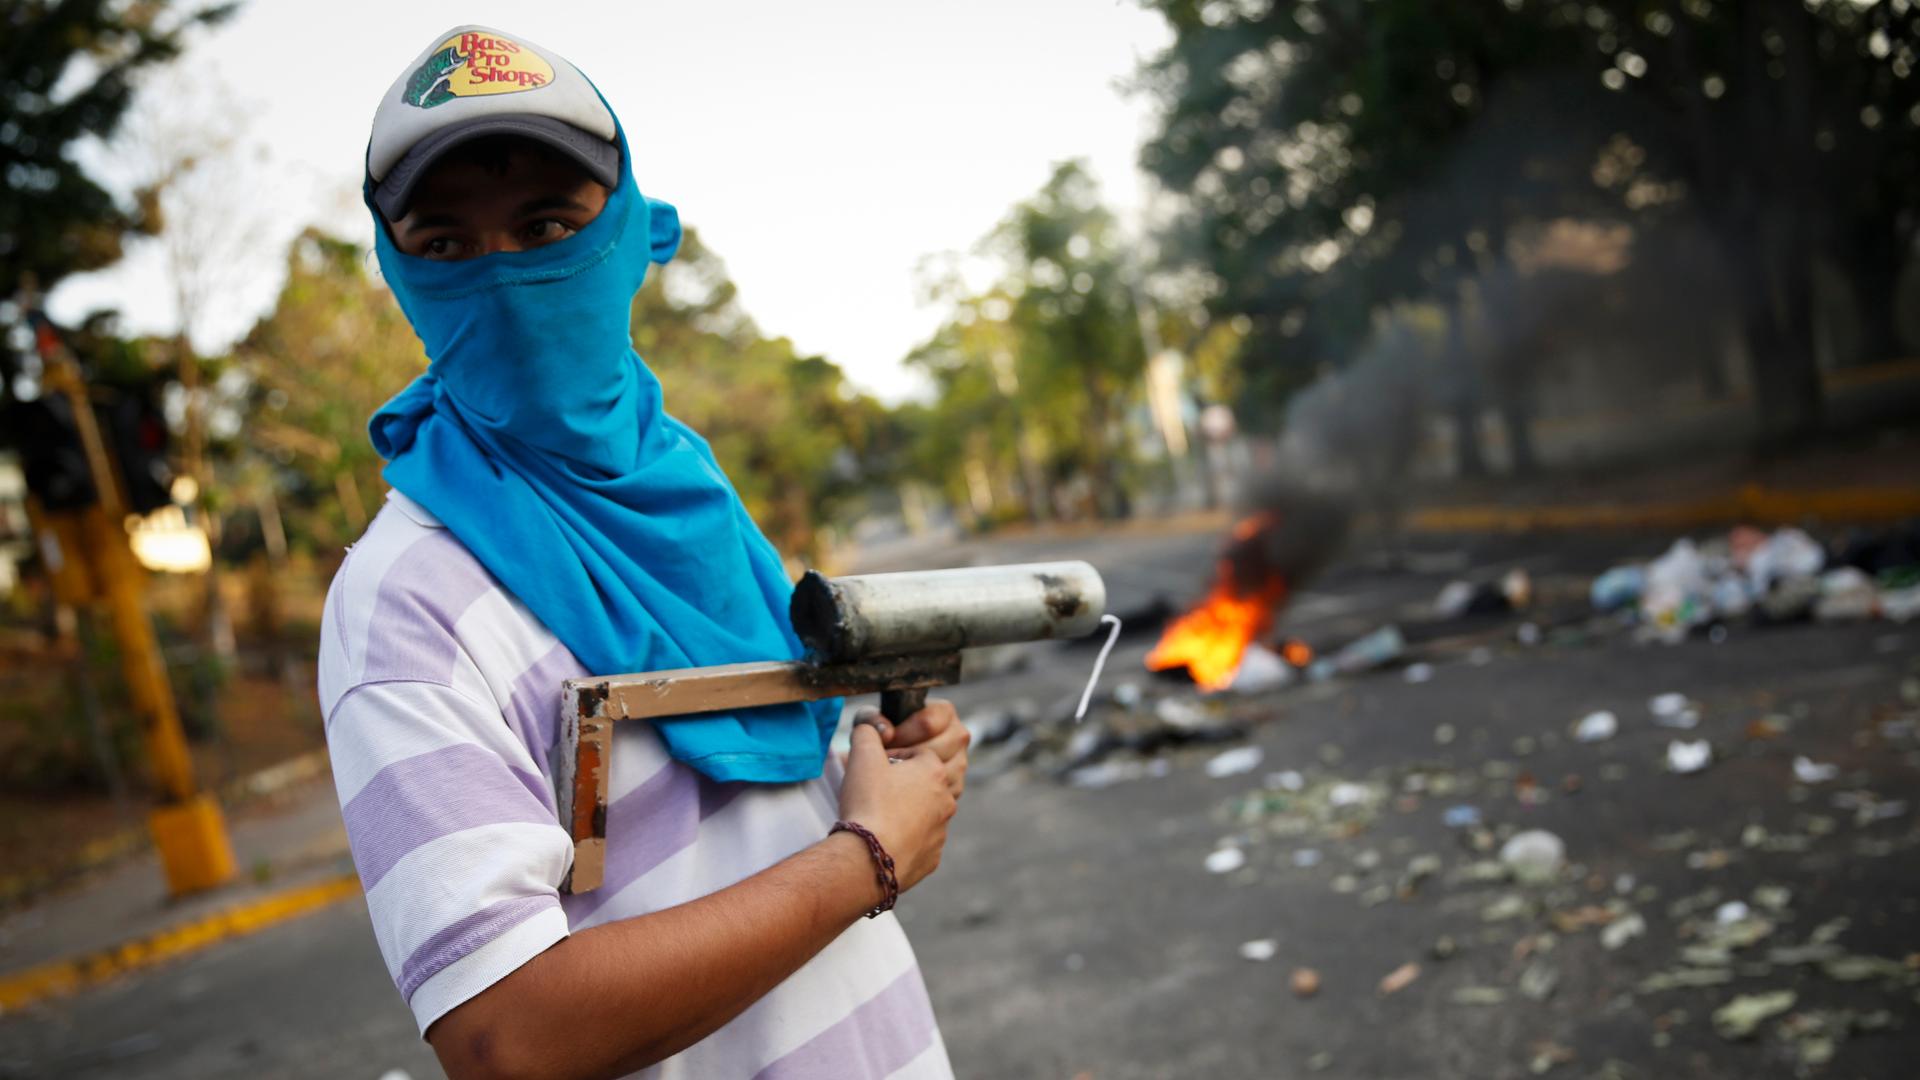 A demonstrator stands guard with a rudimentary mortar in front of a burning barricade during protests against Nicolás Maduro's government in San Cristóbal, Venezuela.